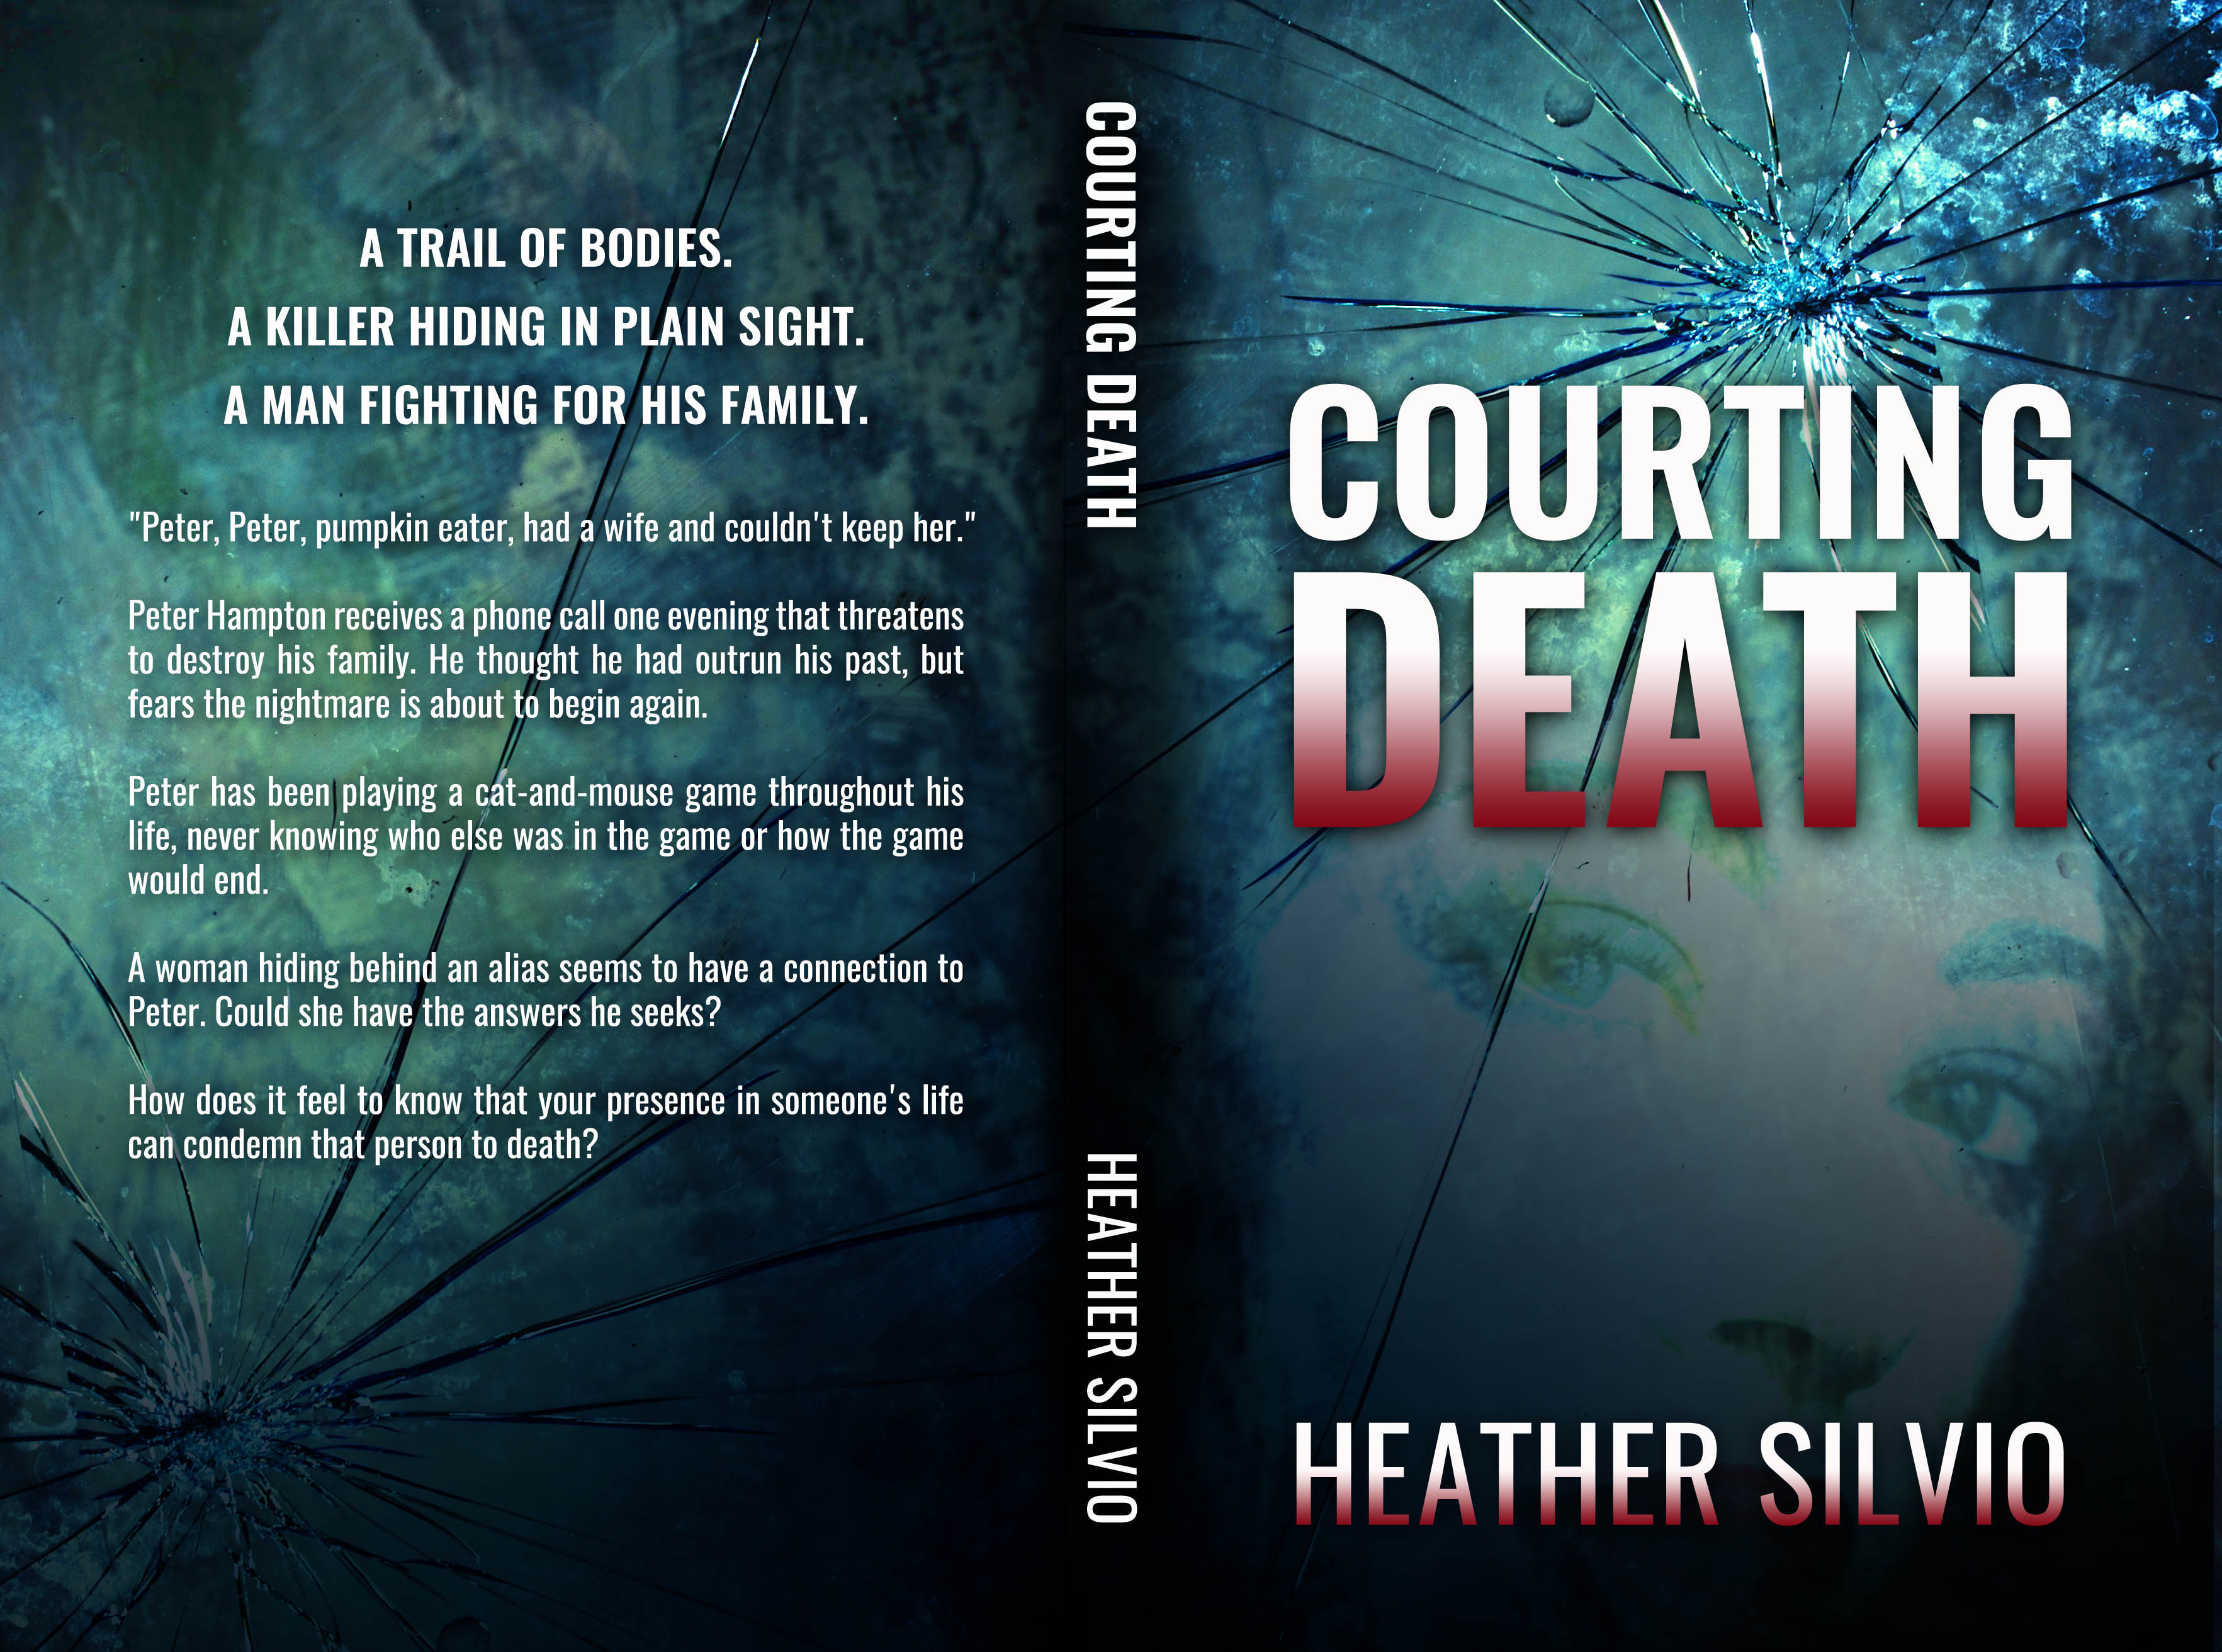 Courting Death Suspense Thriller Paperback Book Cover